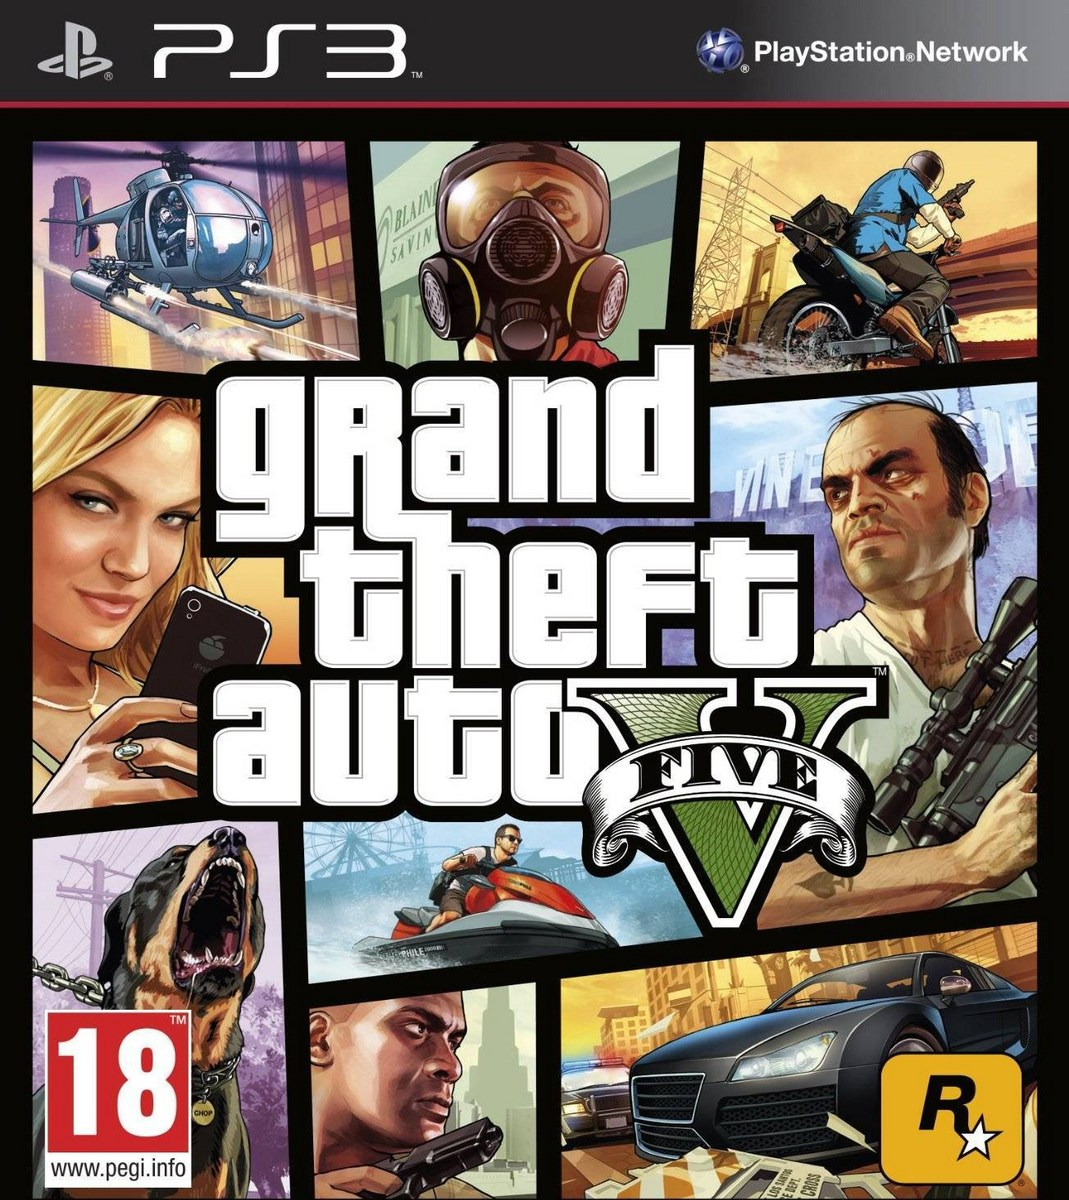 tonight Fruit vegetables employment Grand Theft Auto V PS3 | BestPrice.gr